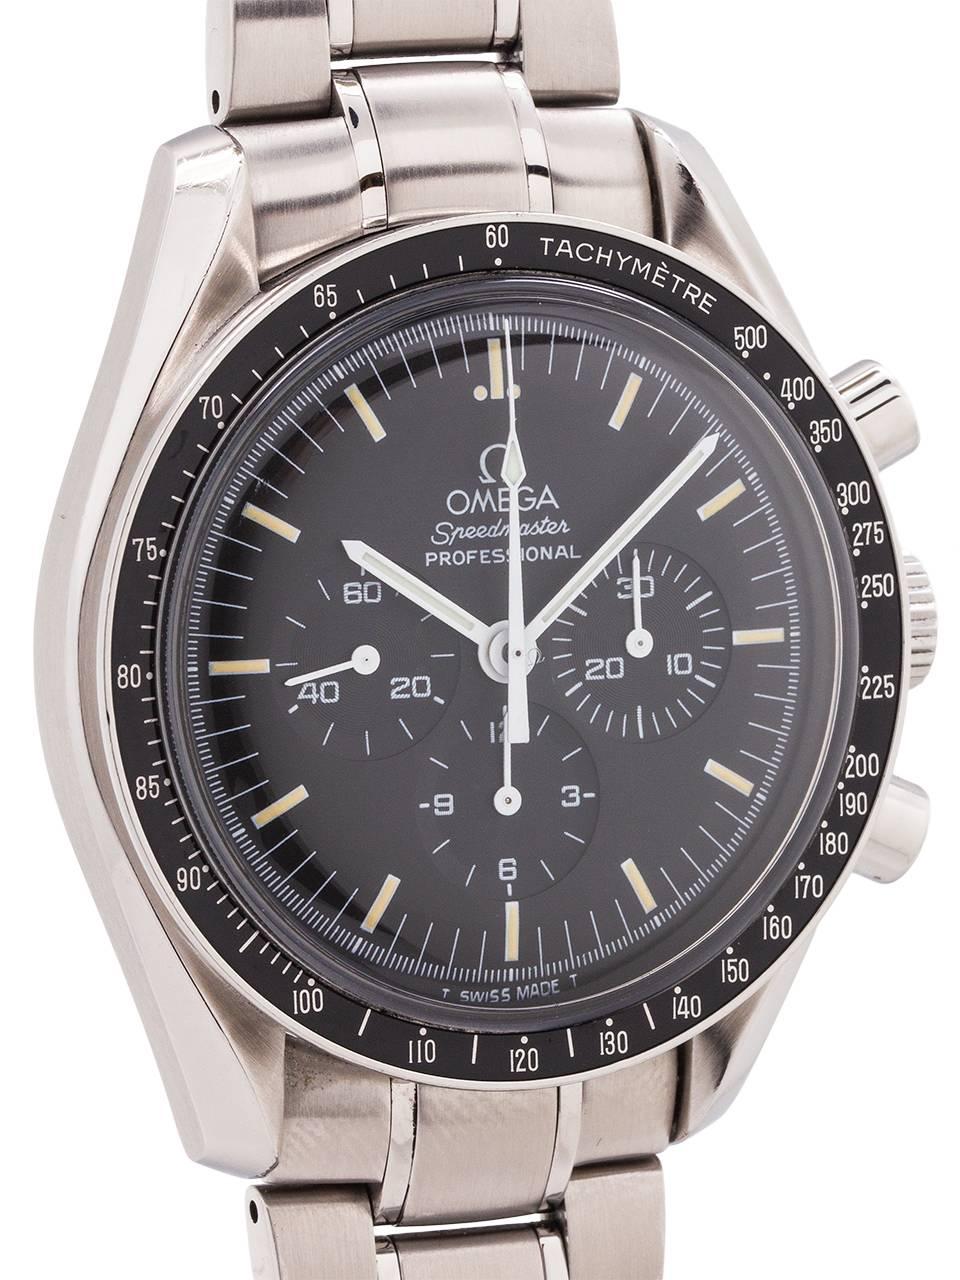 
An exceptional condition preowned Omega Speedmaster Man on the Moon ref 3572.50 movement serial # 48,345,xxx, circa 1997. Featuring a 42mm diameter stainless steel case with black tachometer bezel, black original dial with tritium indexes and